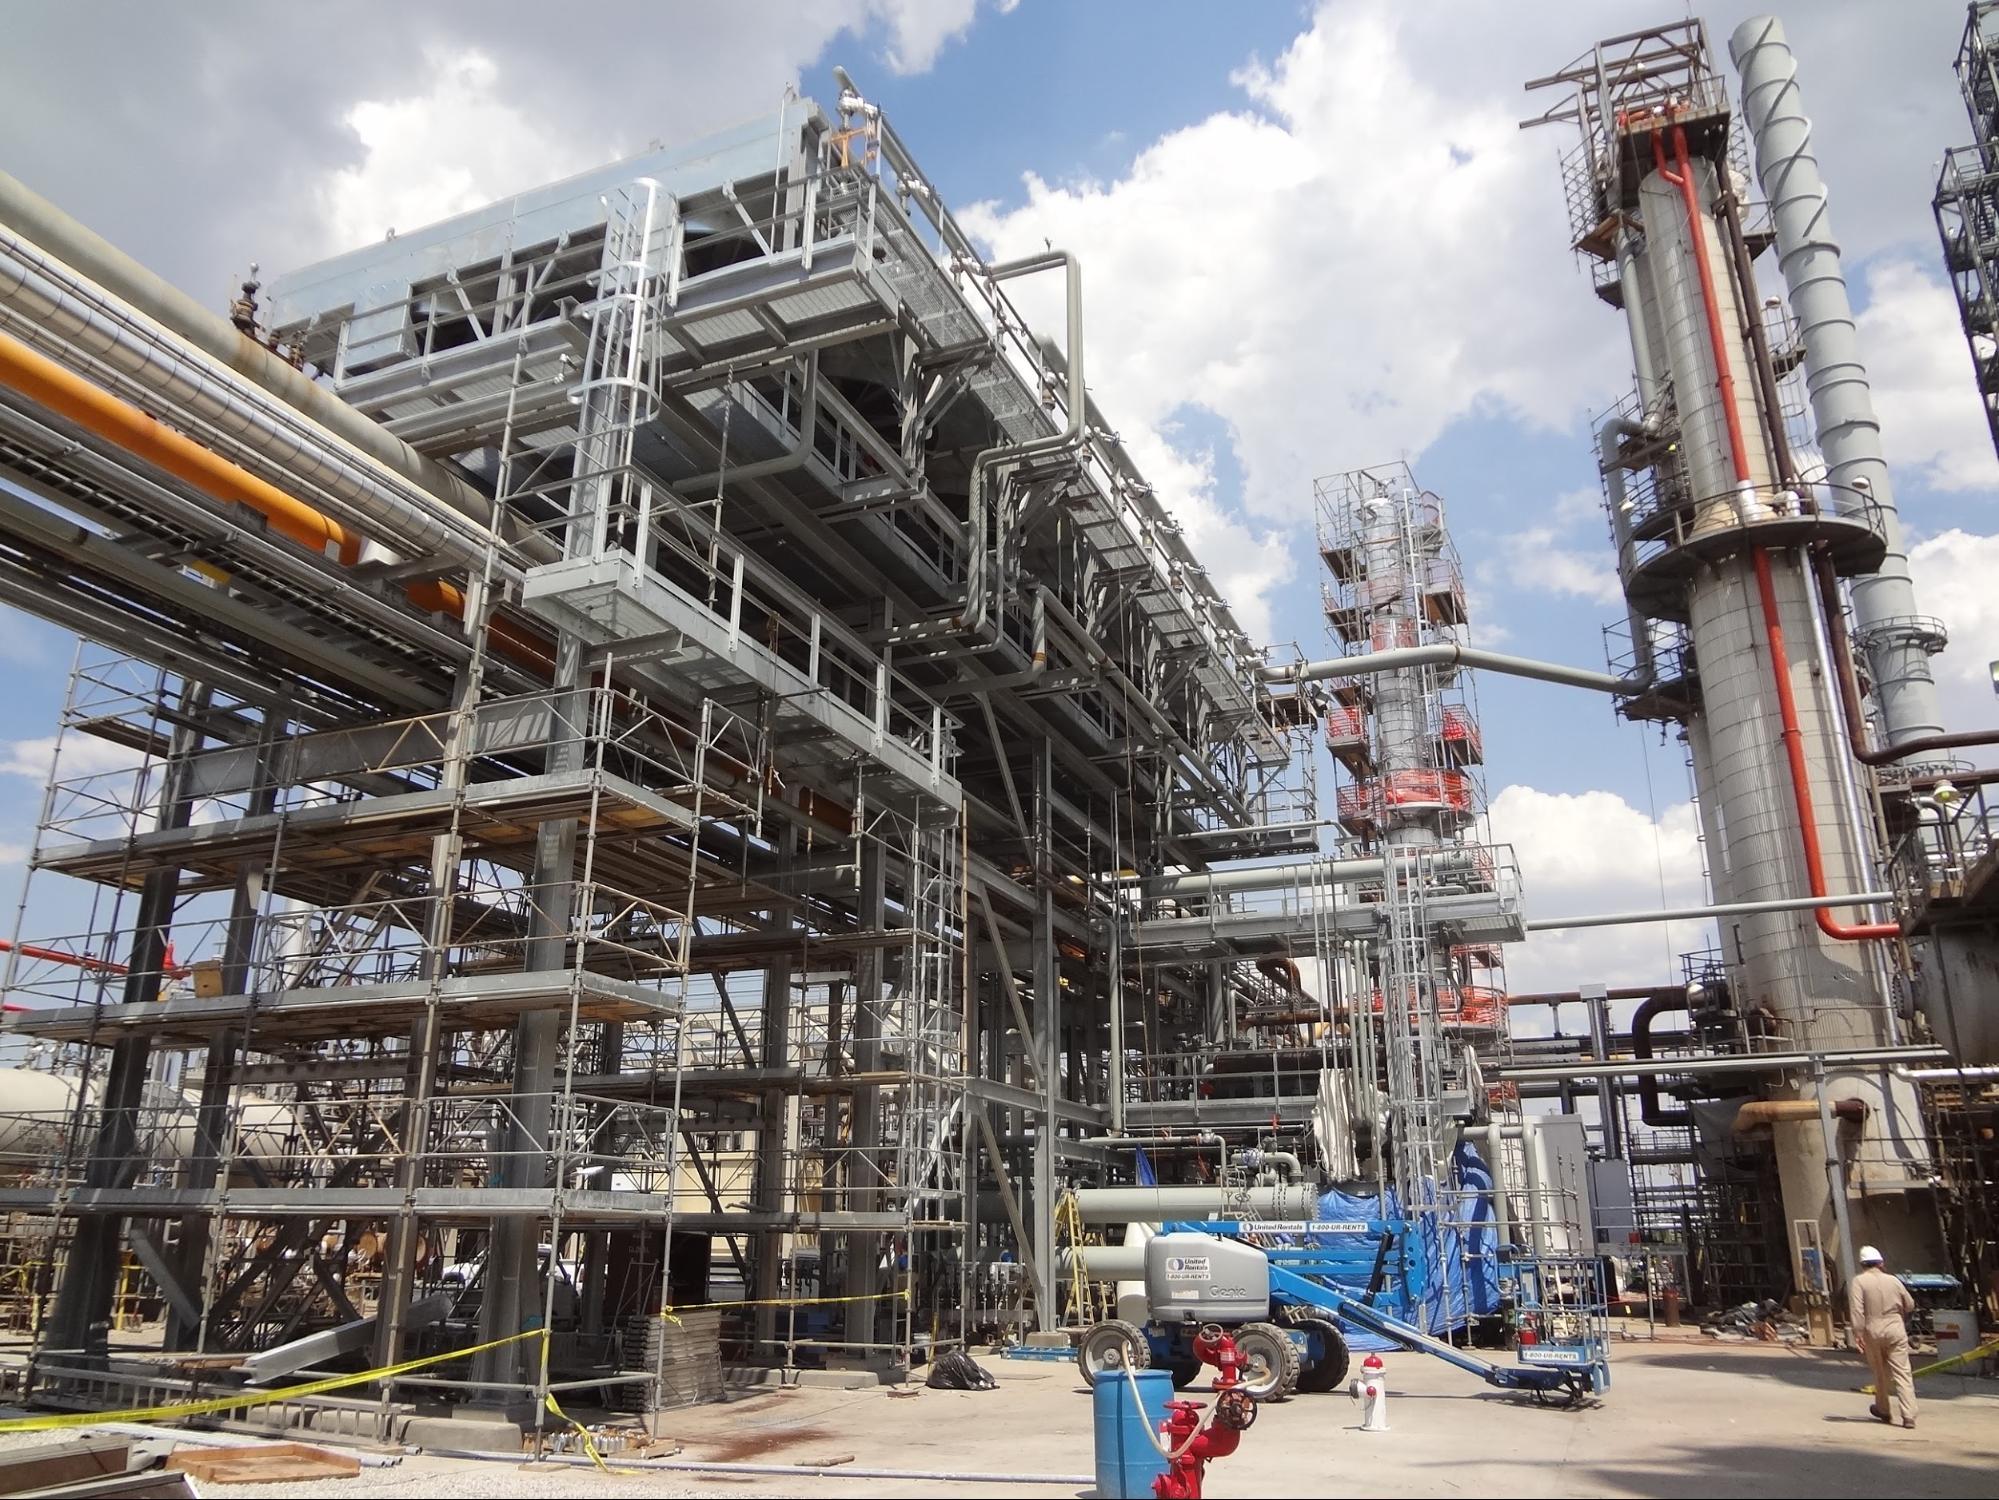 We meet your specific refining needs by designing and executing projects that: